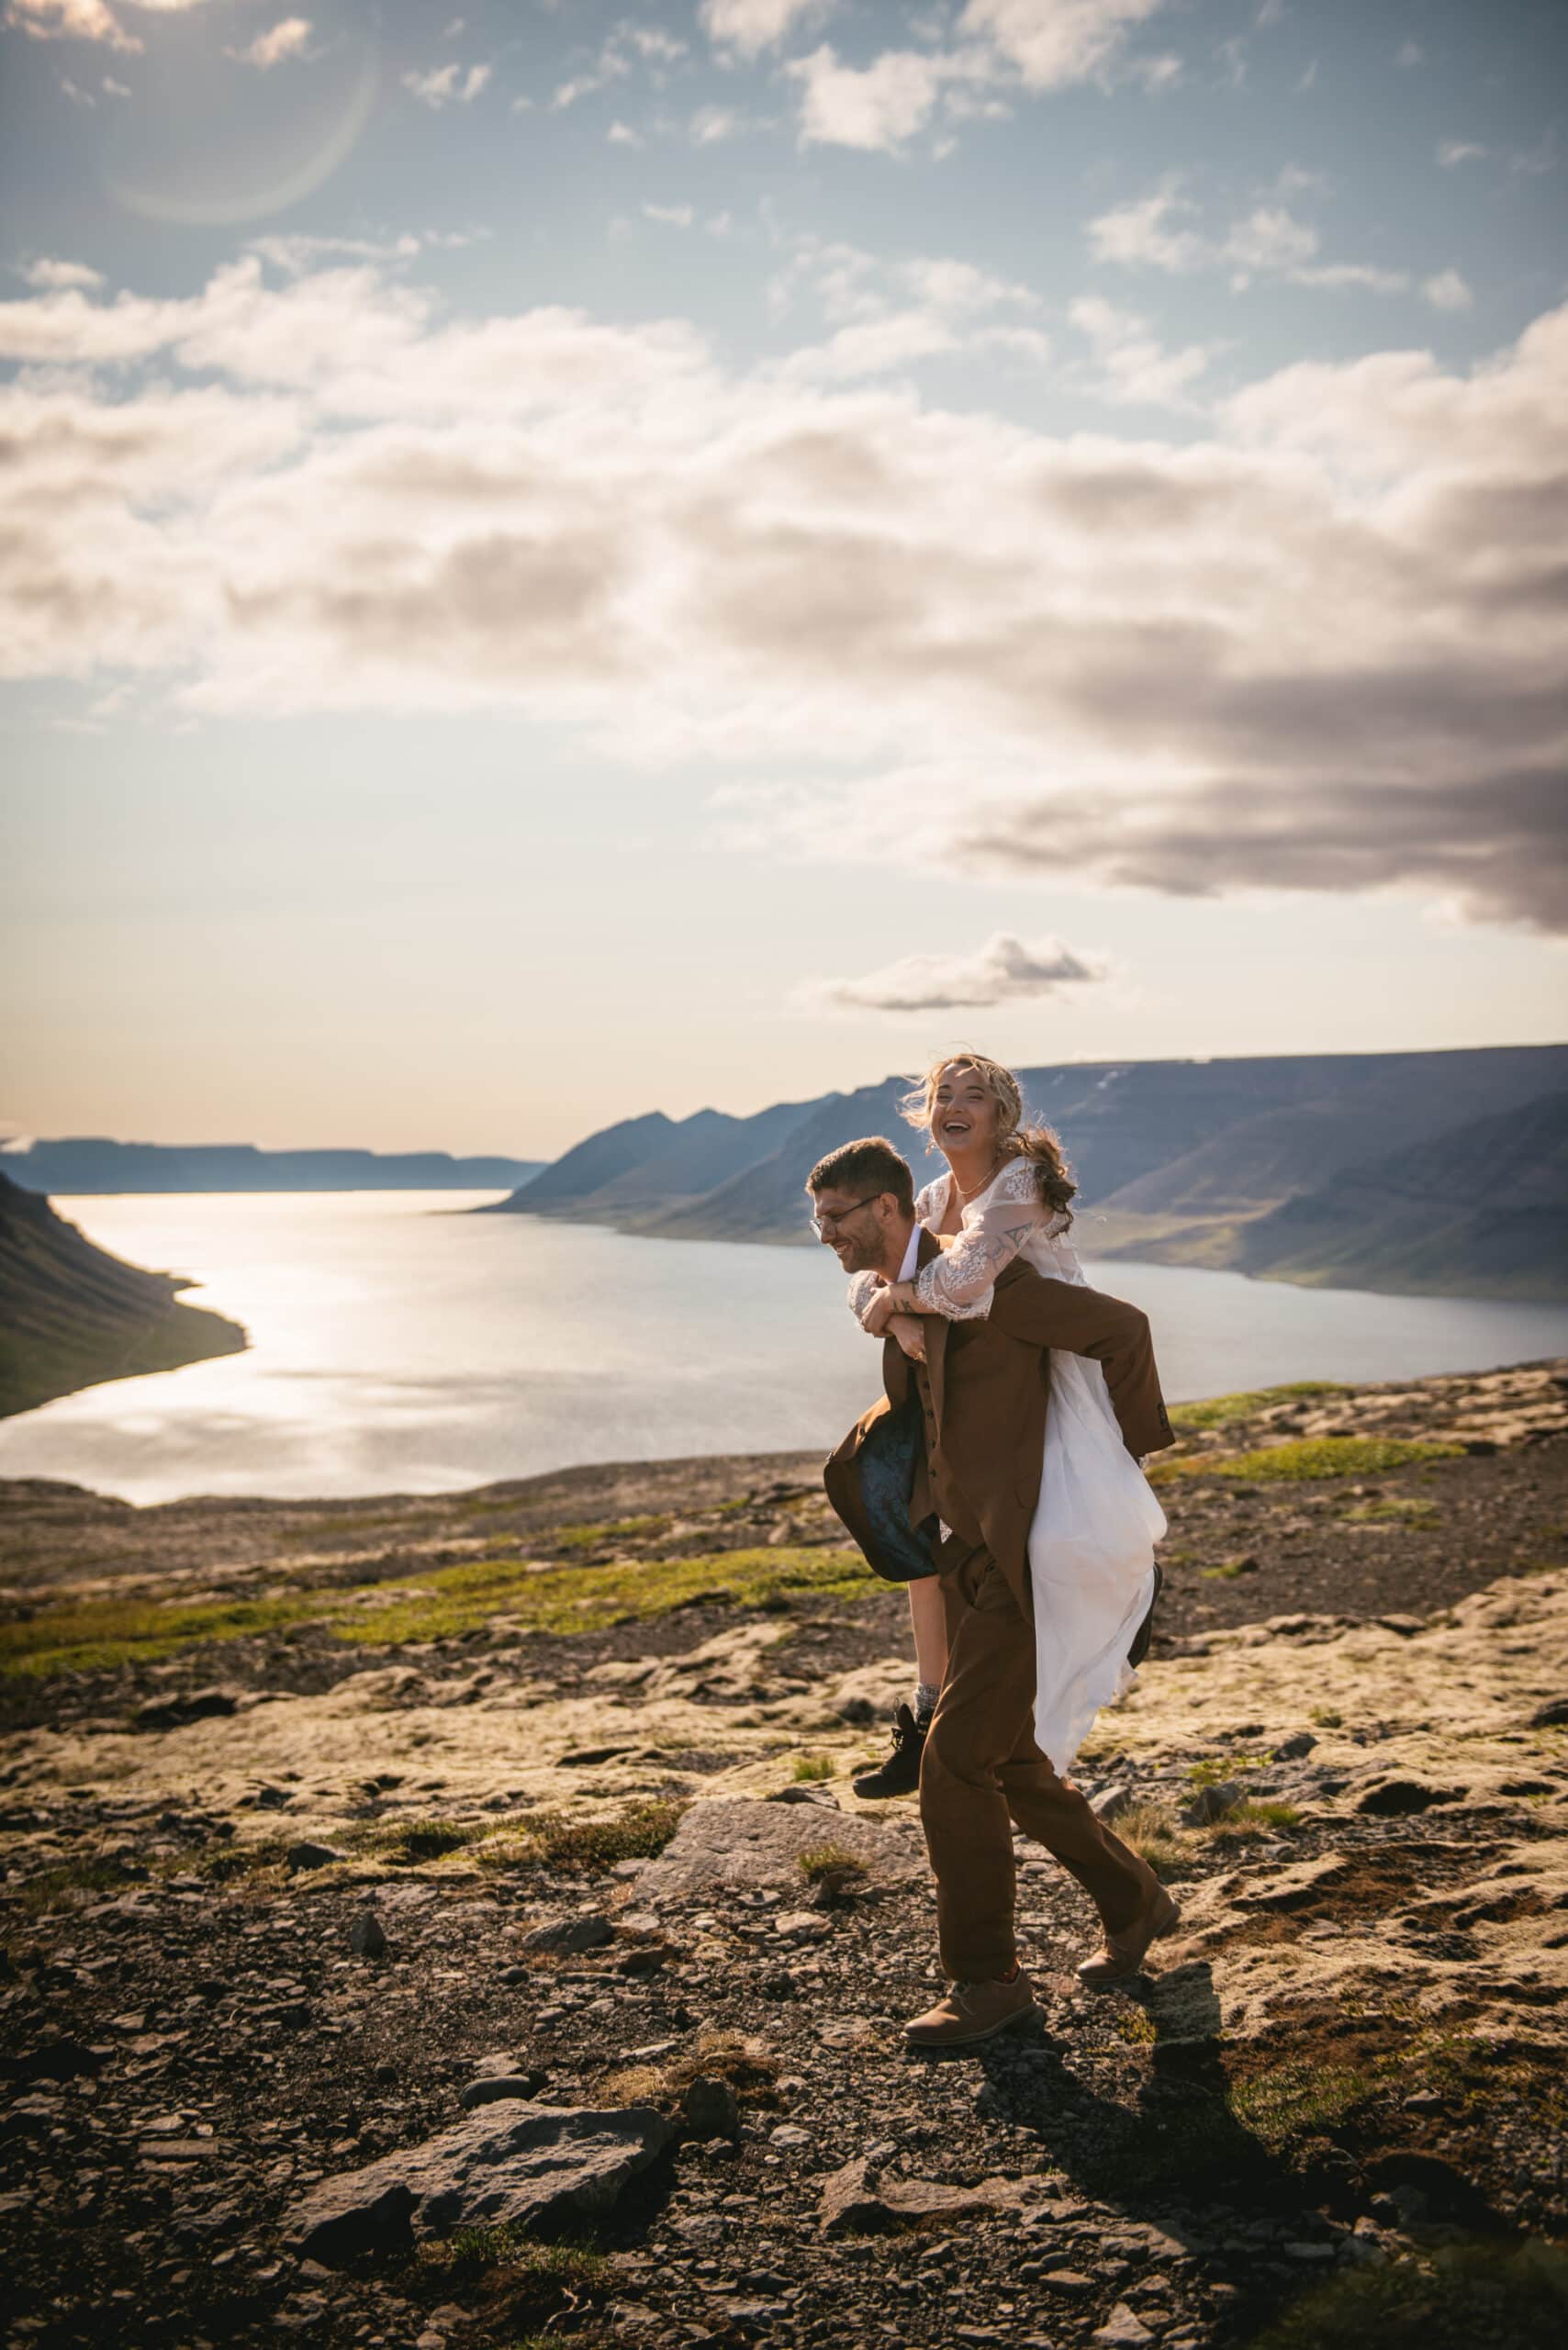 Romantic stroll along the coast, with the Westfjords' breathtaking scenery as a backdrop.